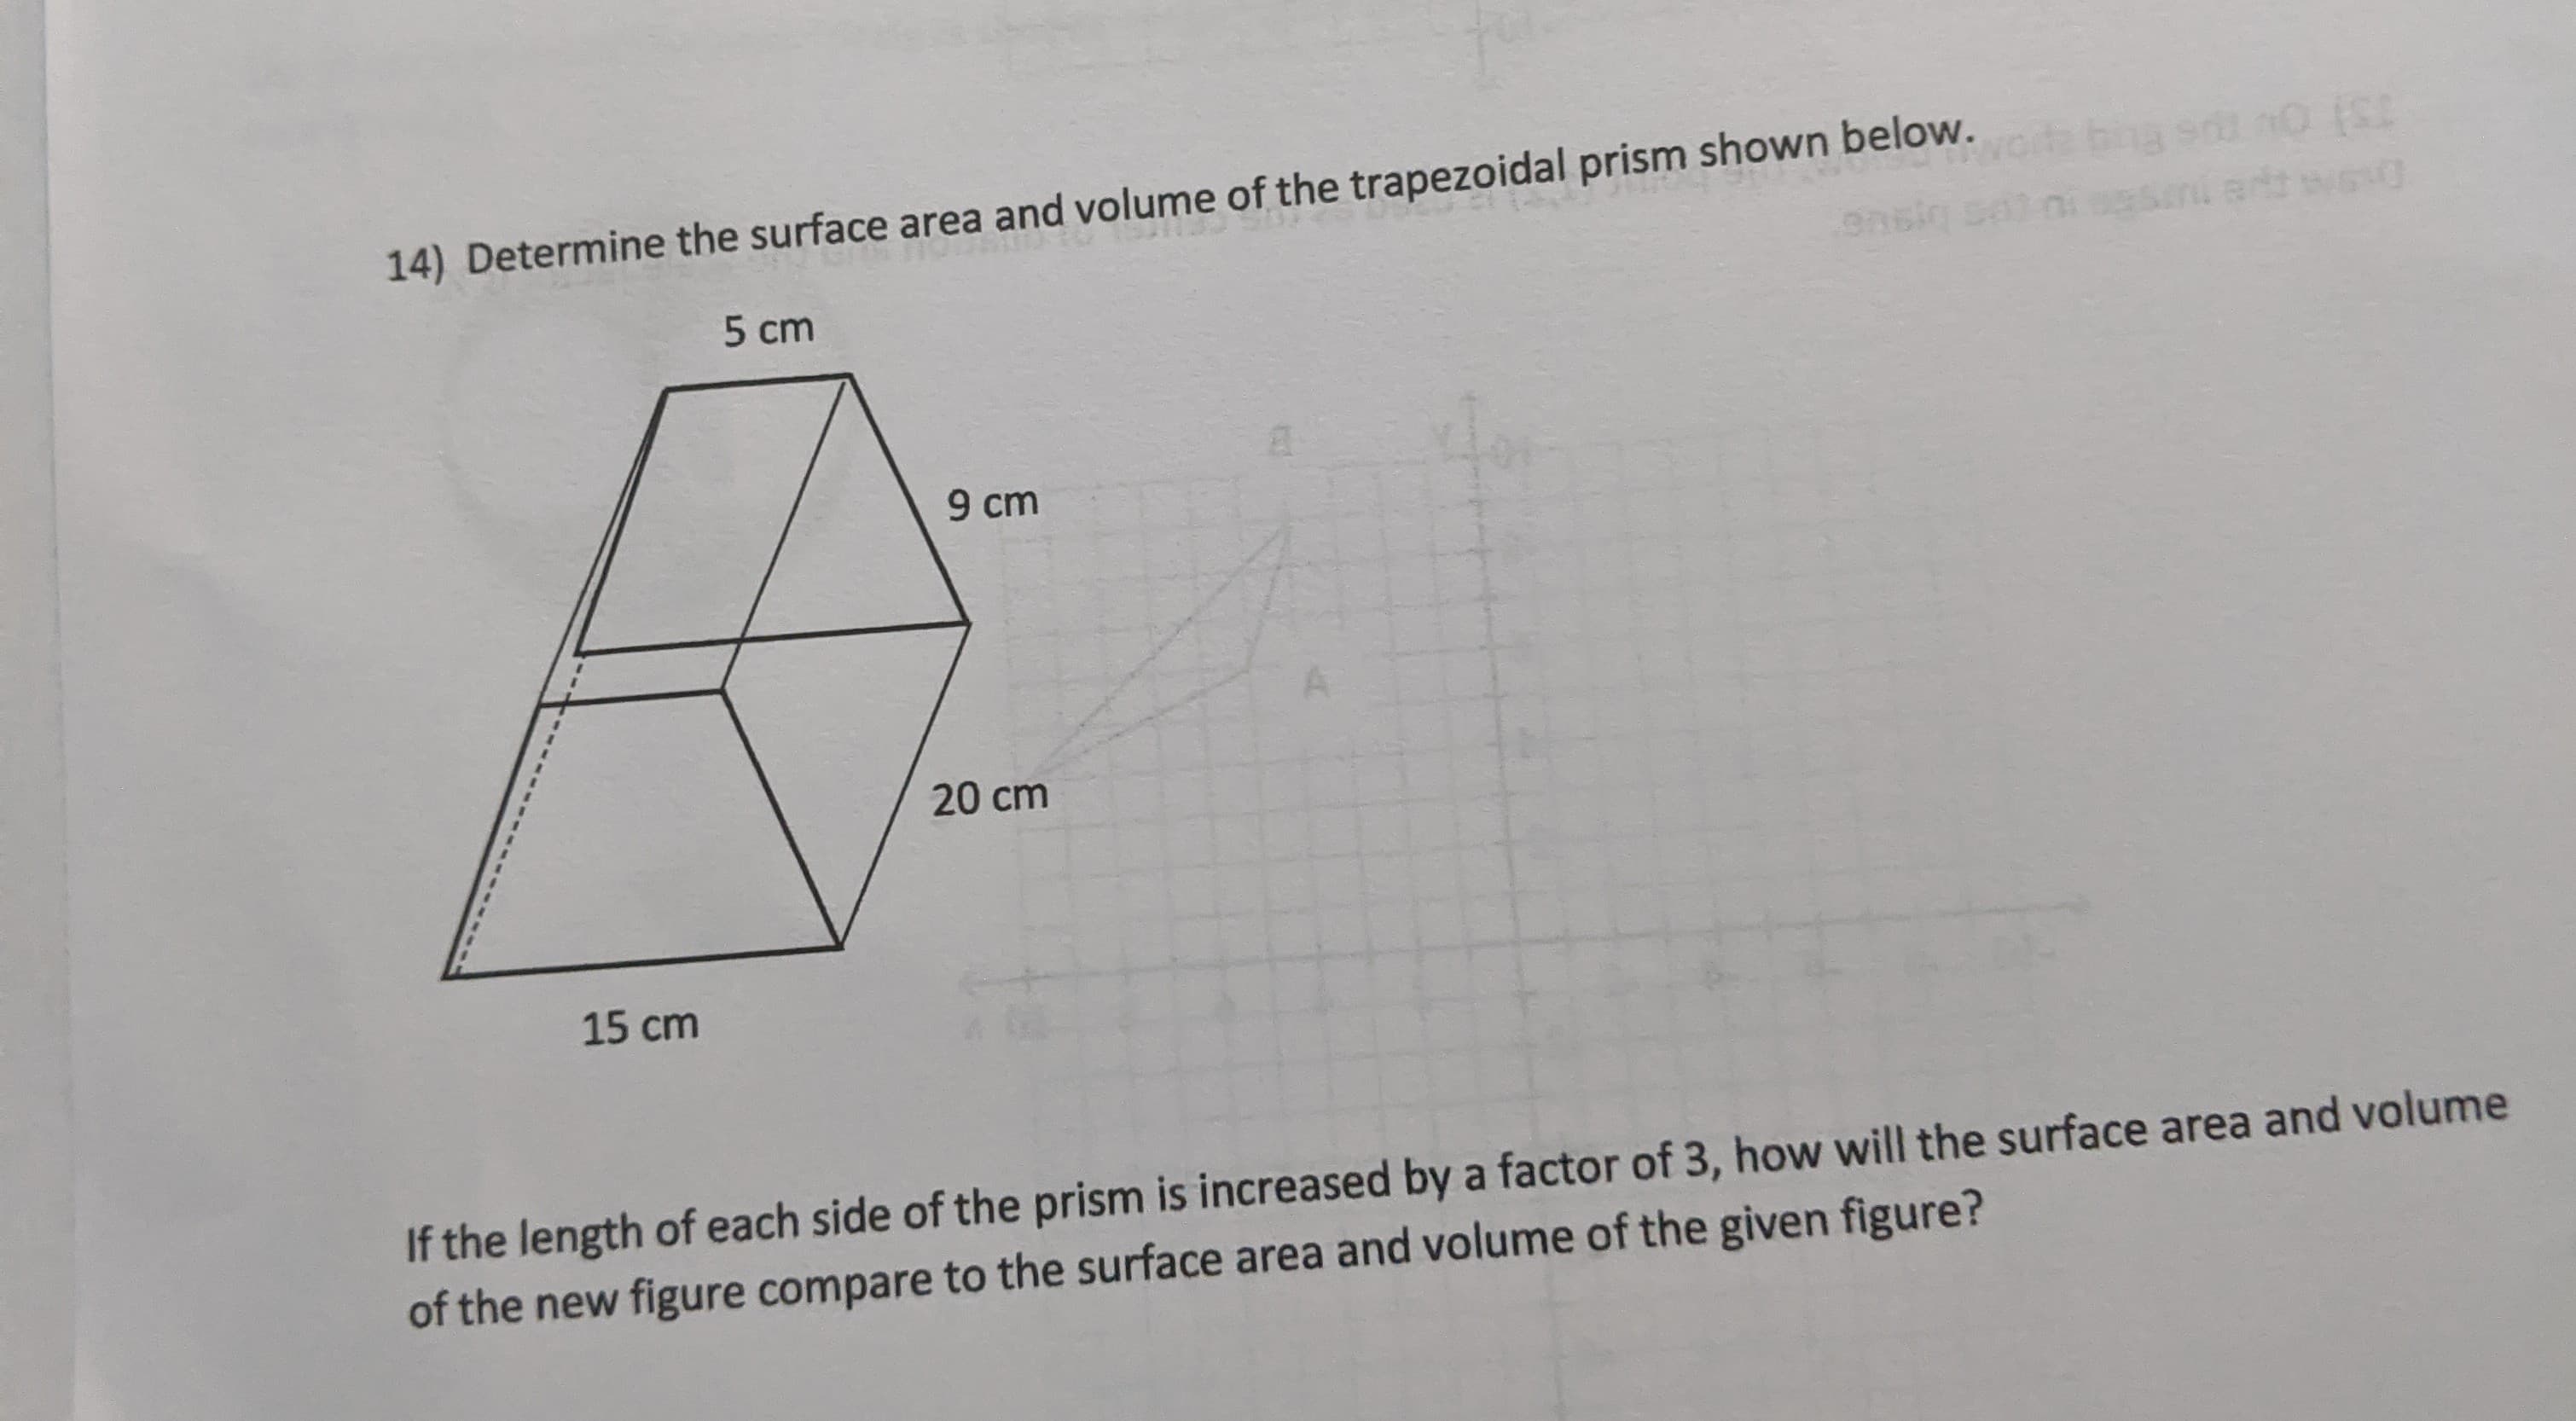 14) Determine the surface area and volume of the trapezoidal prism shown below.os ba s nO ISE
ansig sai nisesini artt wesg
5 cm
9 cm
20 cm
15 cm
If the length of each side of the prism is increased by a factor of 3, how will the surface area and volume
of the new figure compare to the surface area and volume of the given figure?
